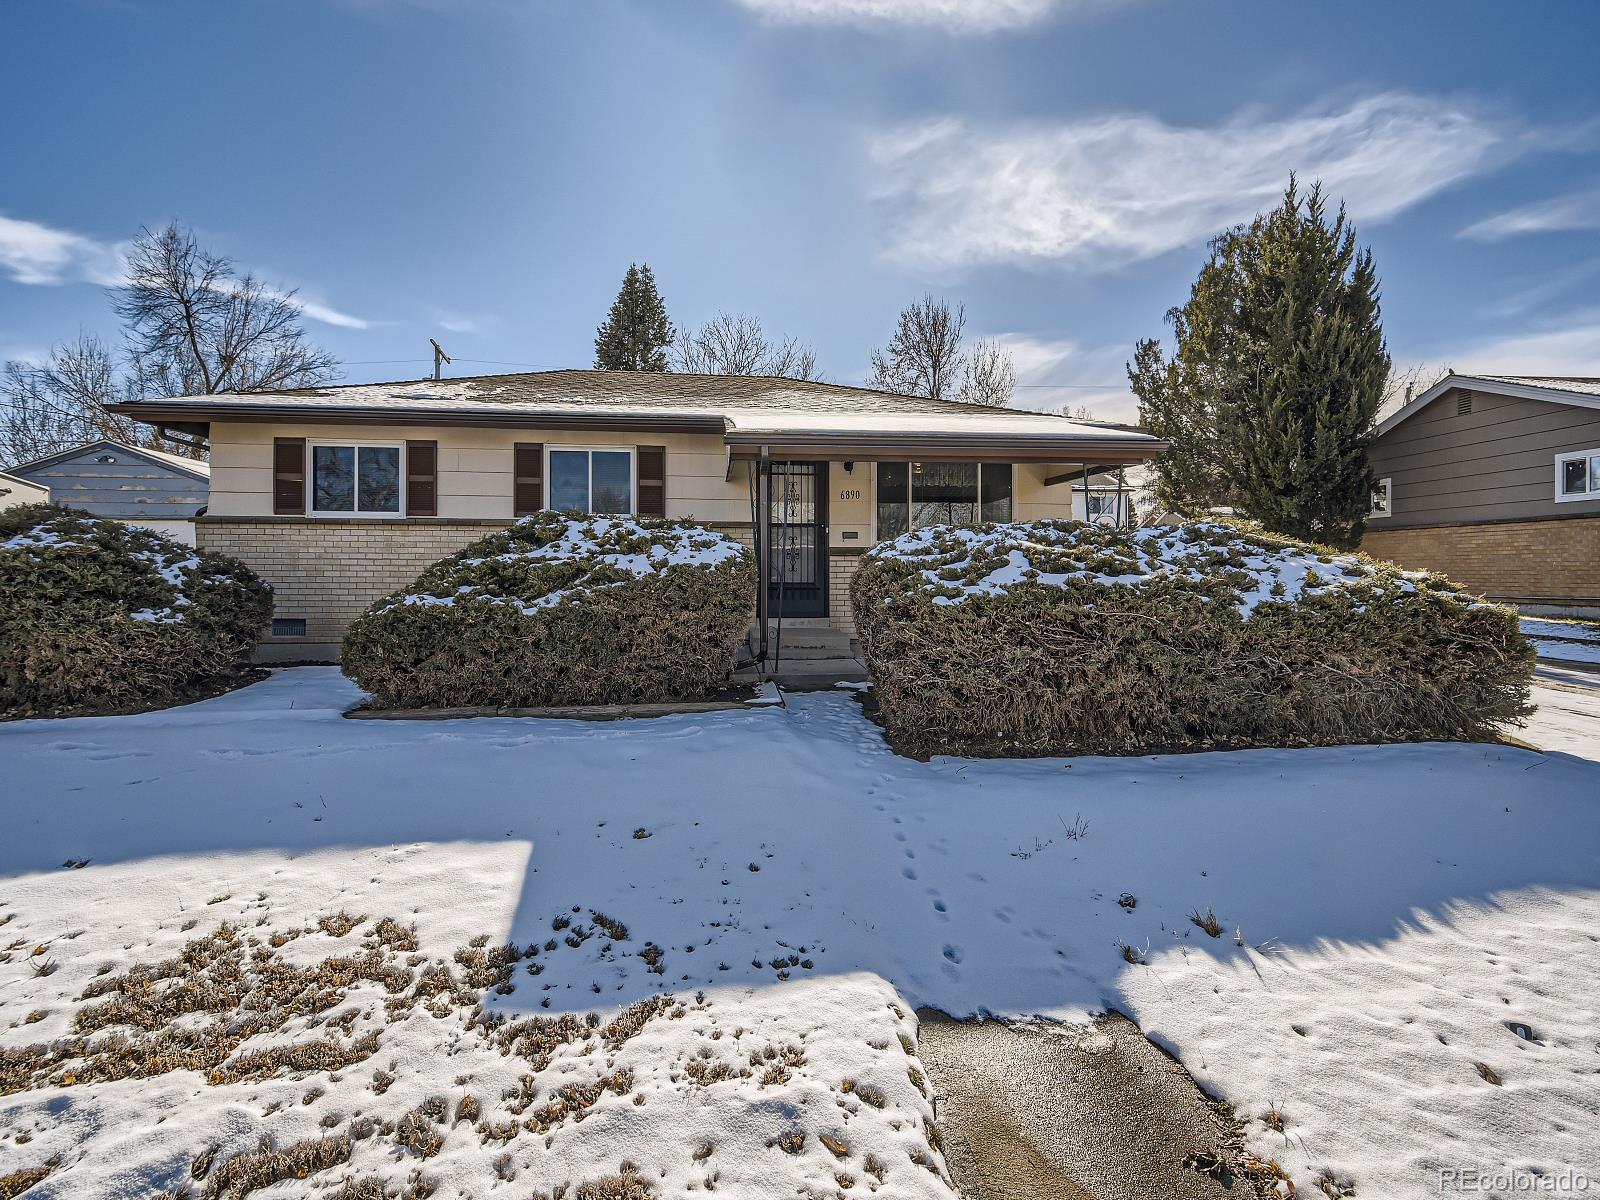 6890 w oregon drive, Lakewood sold home. Closed on 2024-02-09 for $435,000.